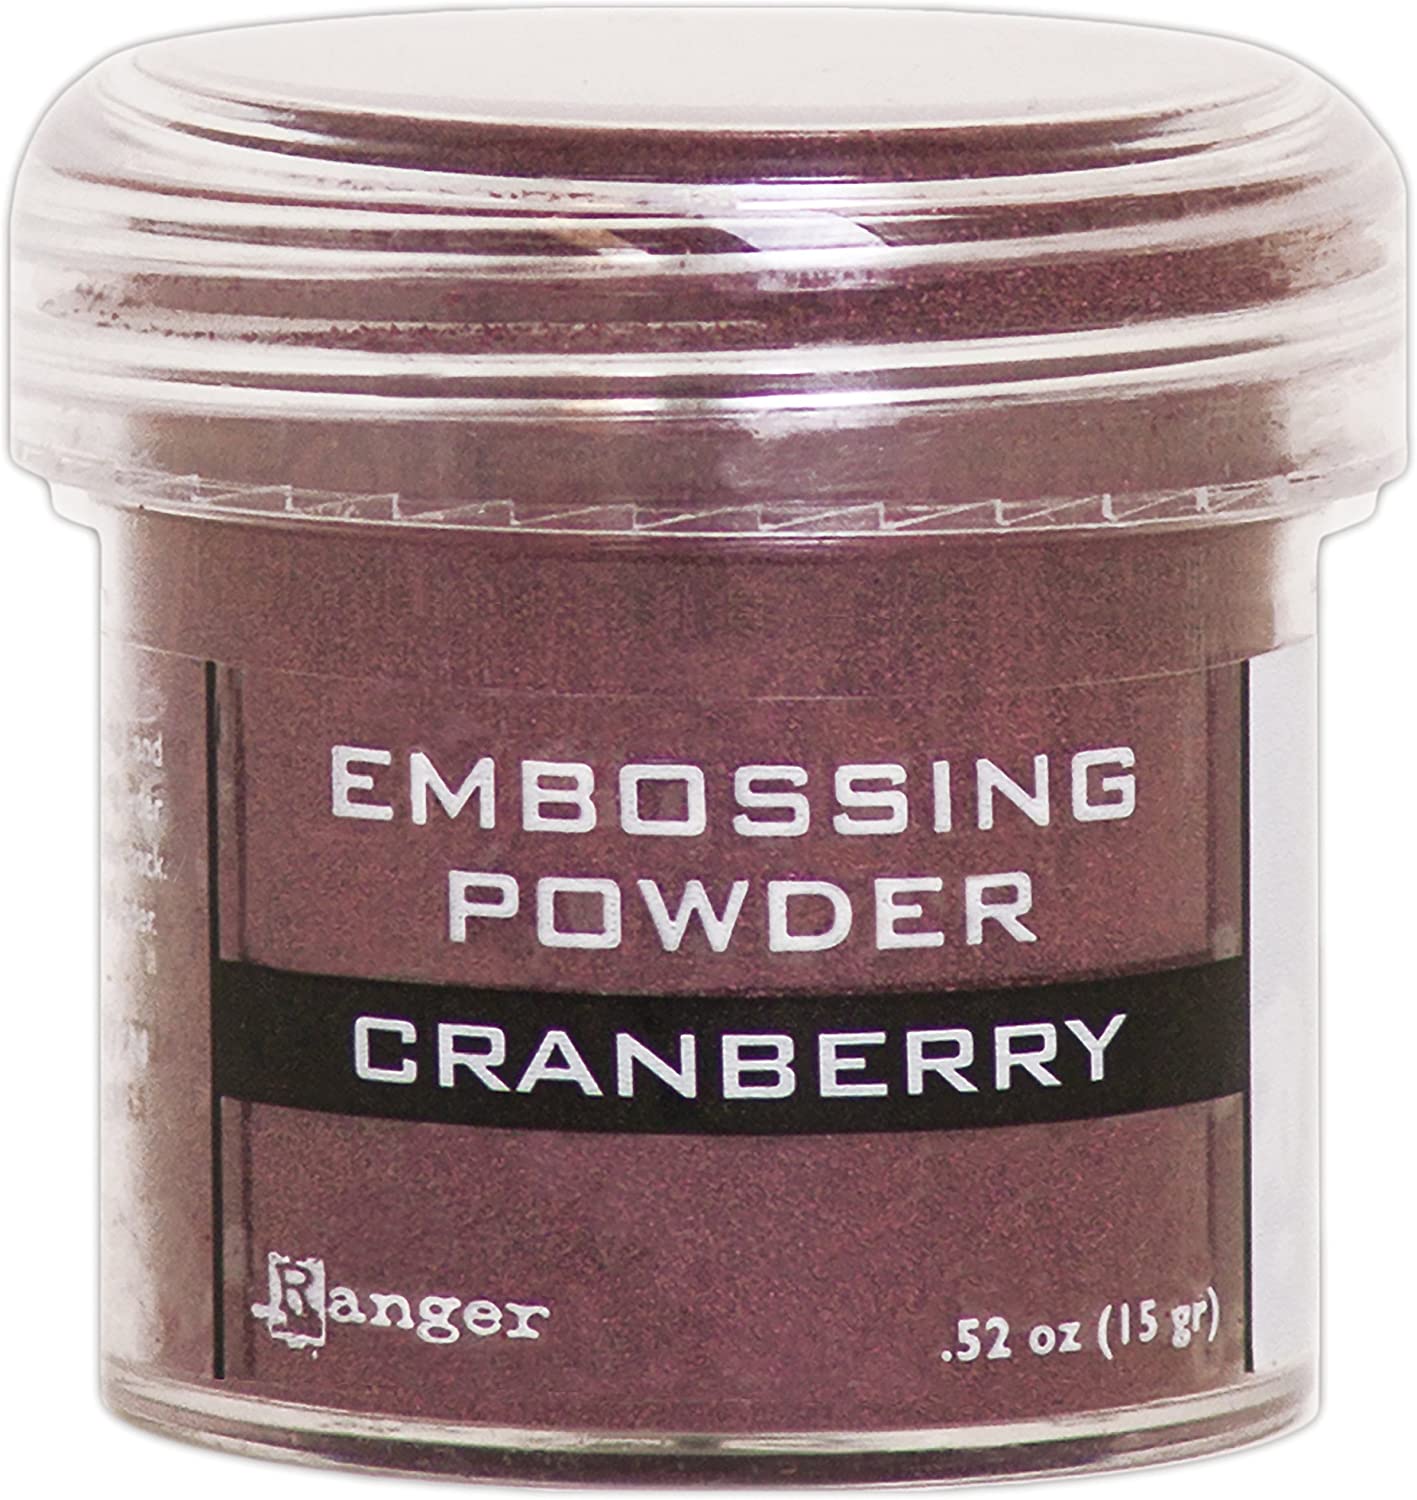 Polvo para Embossing - Cranberry